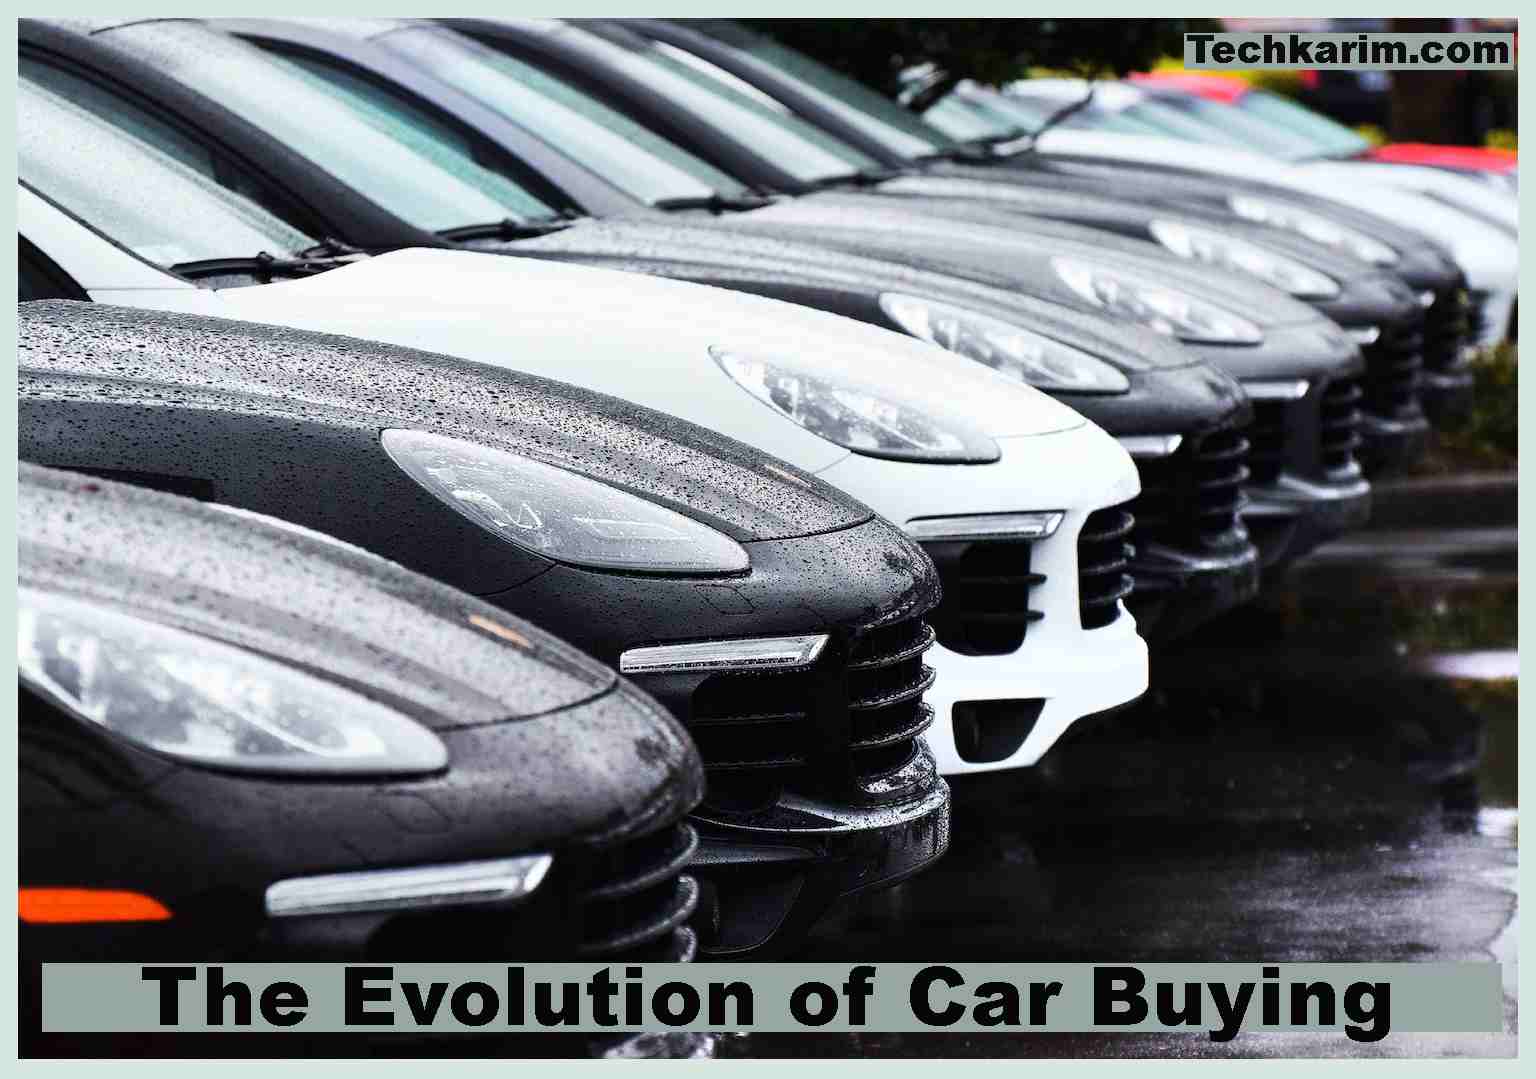 The Evolution of Car Buying